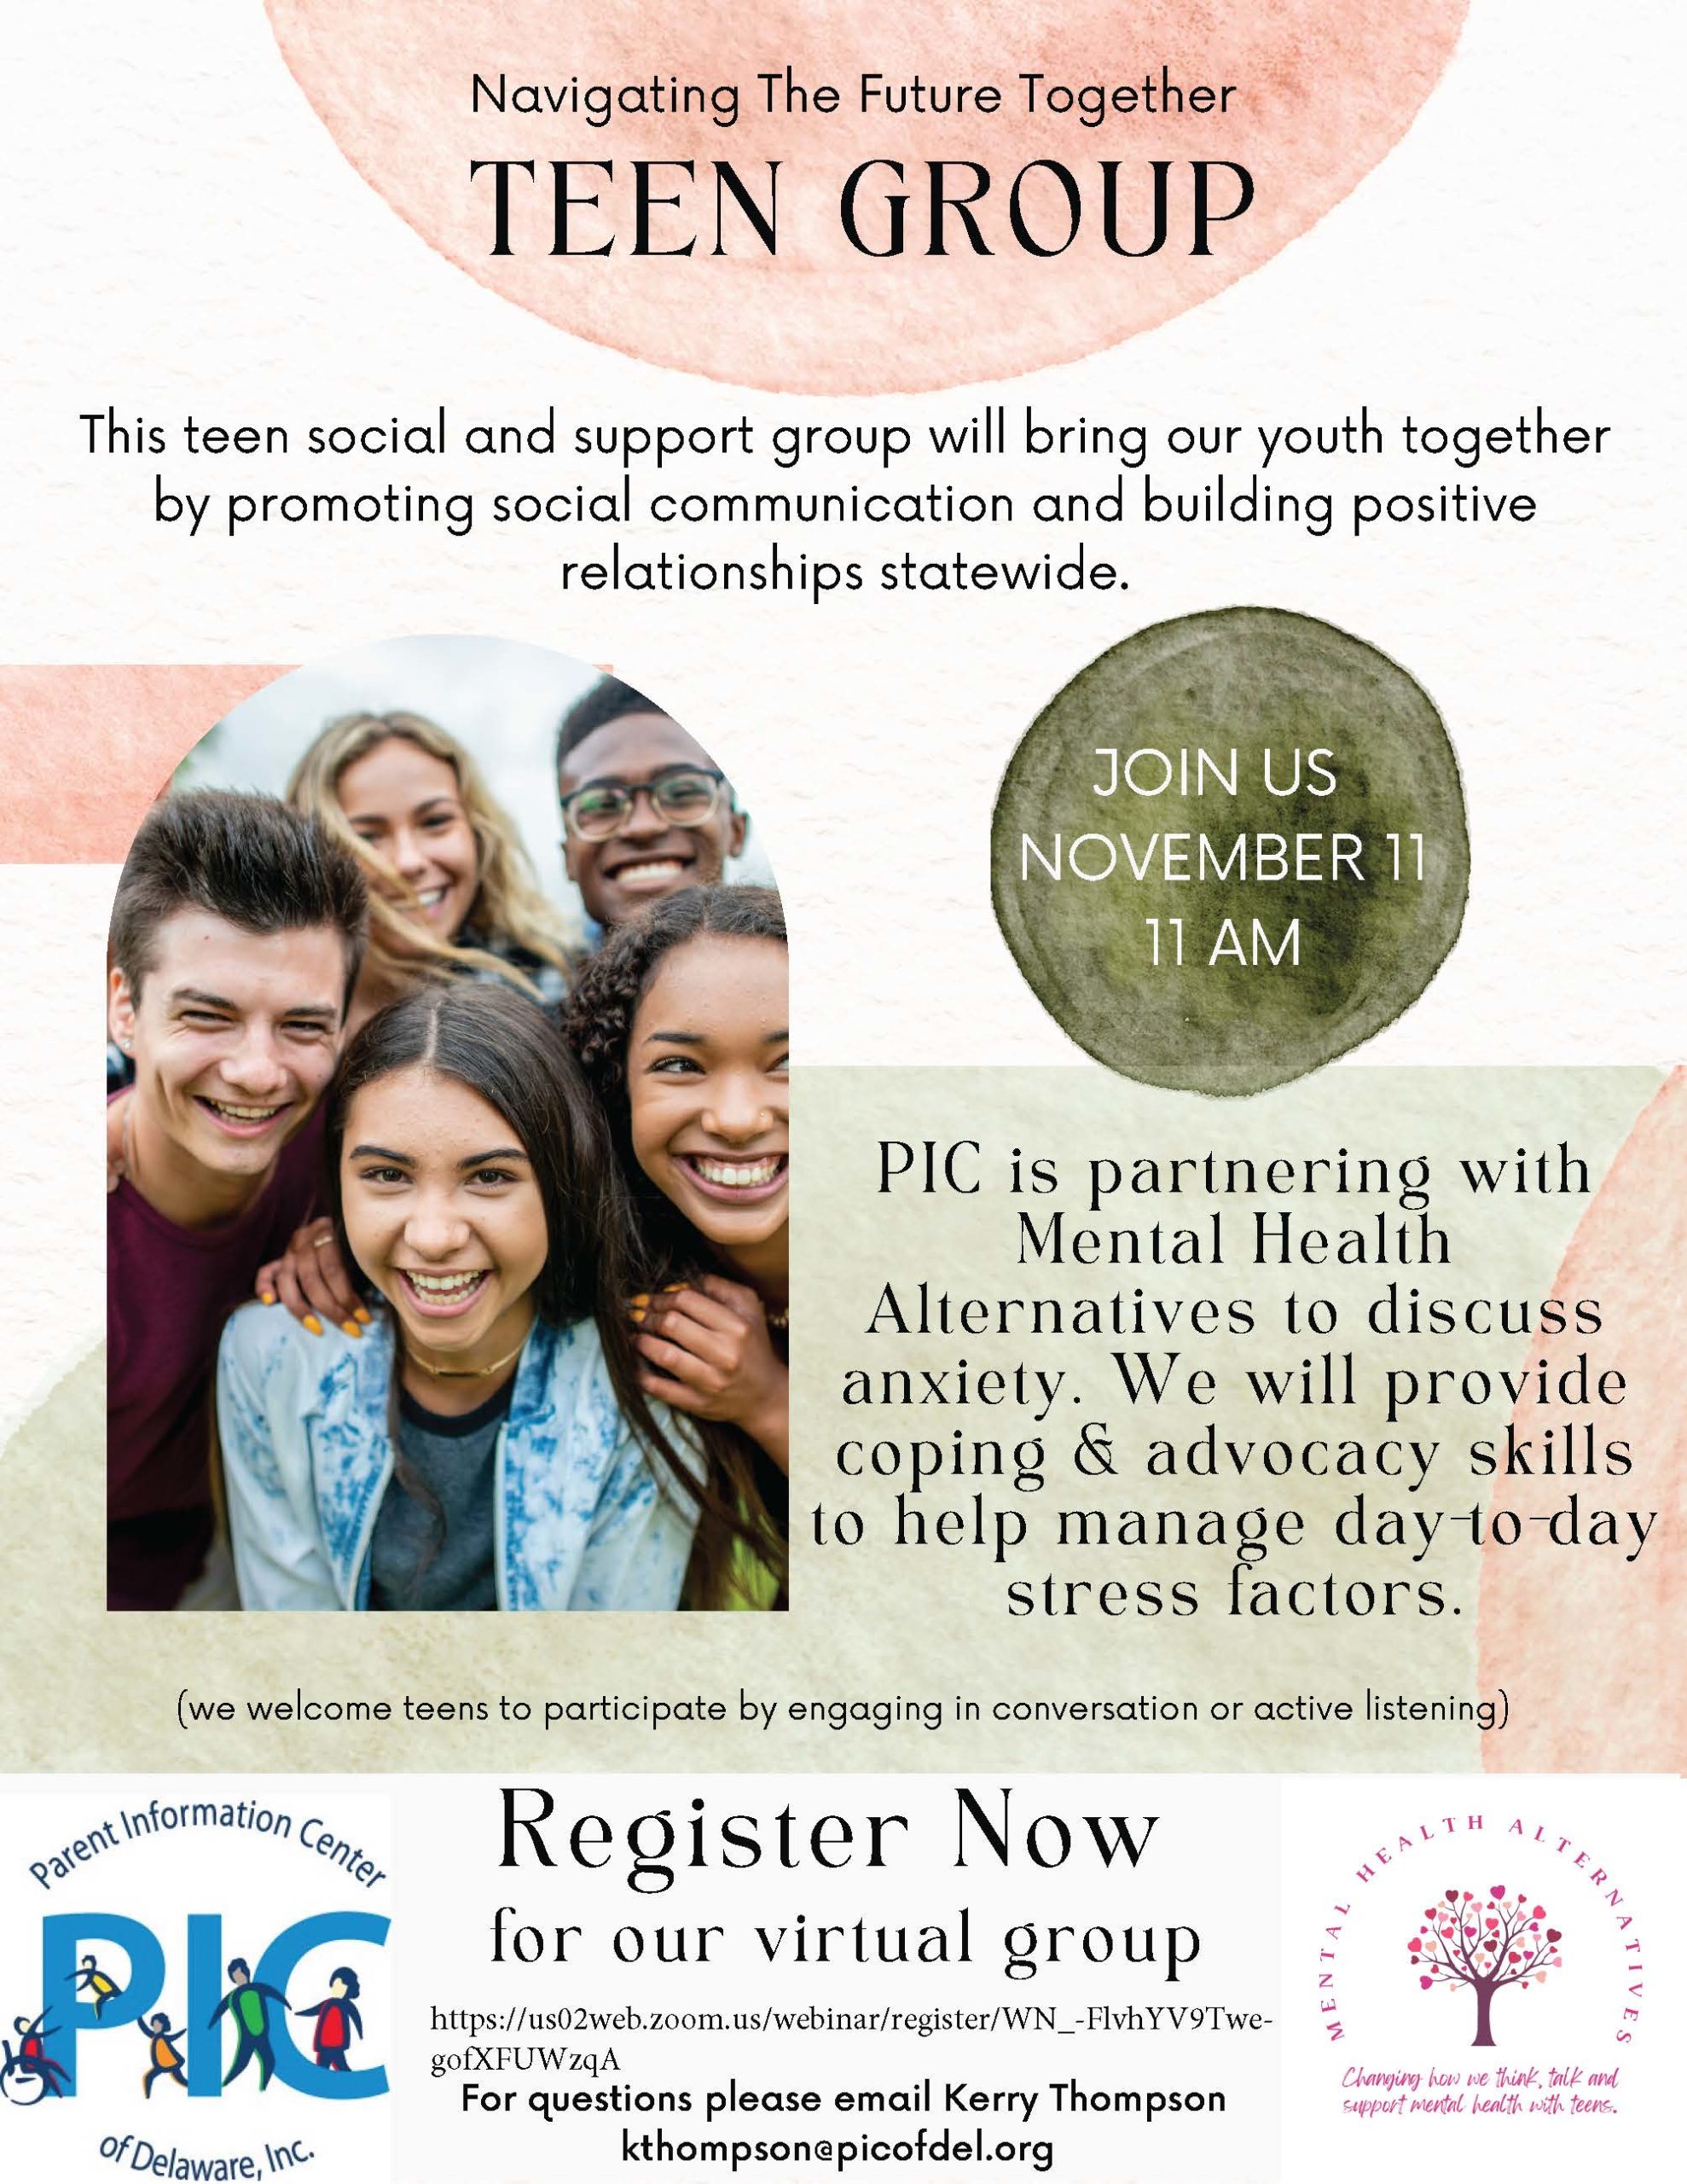 Navigating The Future Together- Teen Group